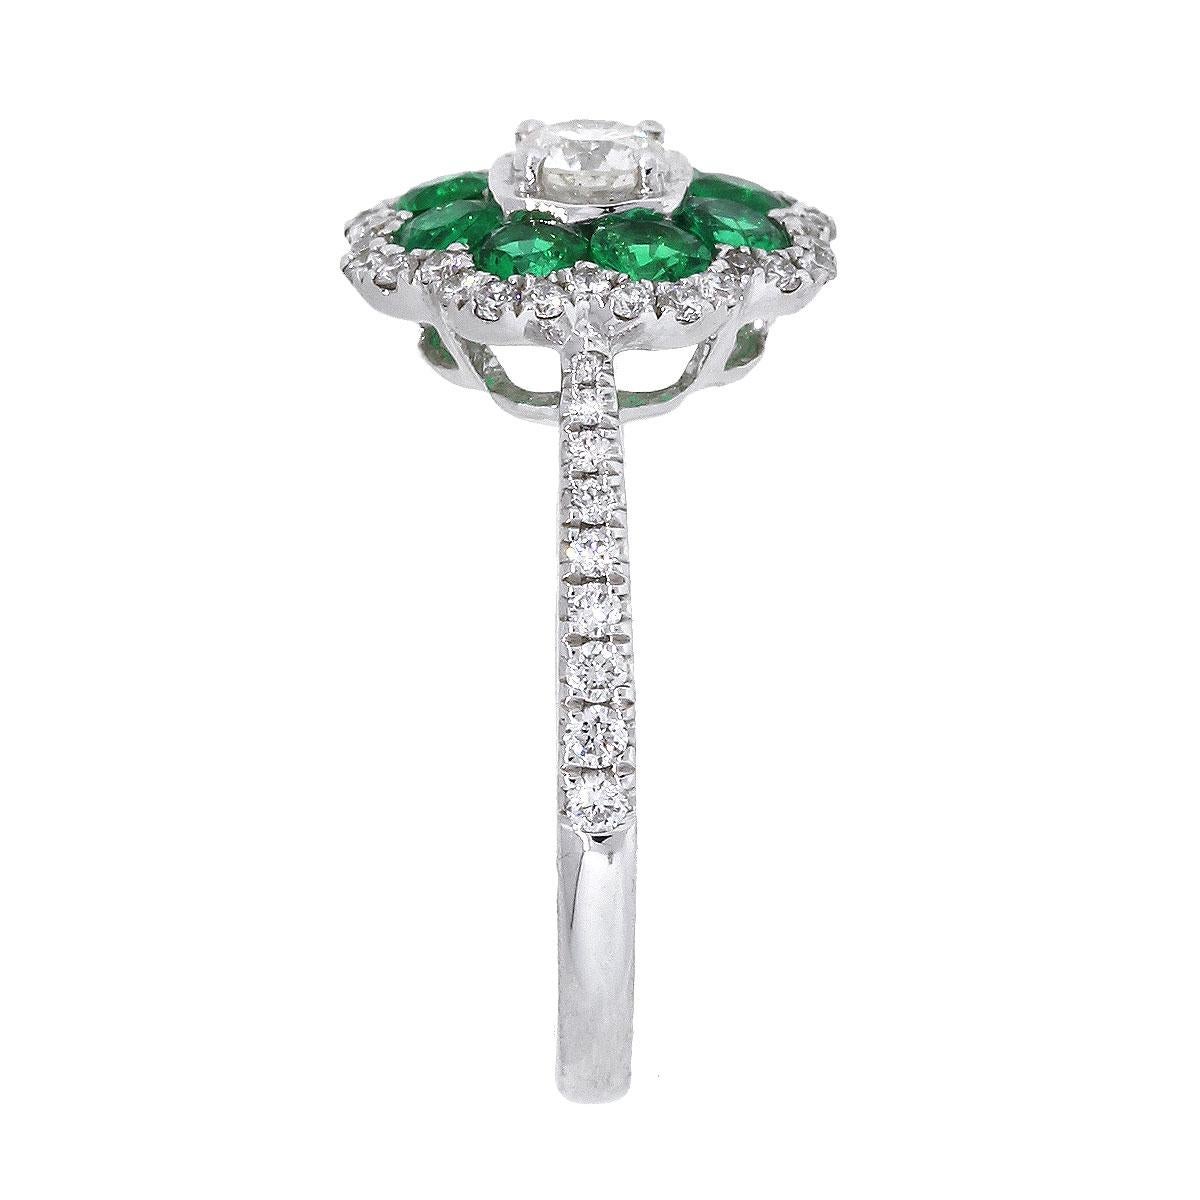 Material: 18k White Gold
Round Diamond Details: Approximately 0.54ctw of round brilliant diamonds. Diamonds are G/H in color and VS in clarity
Emerald Details: Approximately 0.59ctw of round cut Emerald gemstones.
Size: 6.25
Total Weight: 3.8g